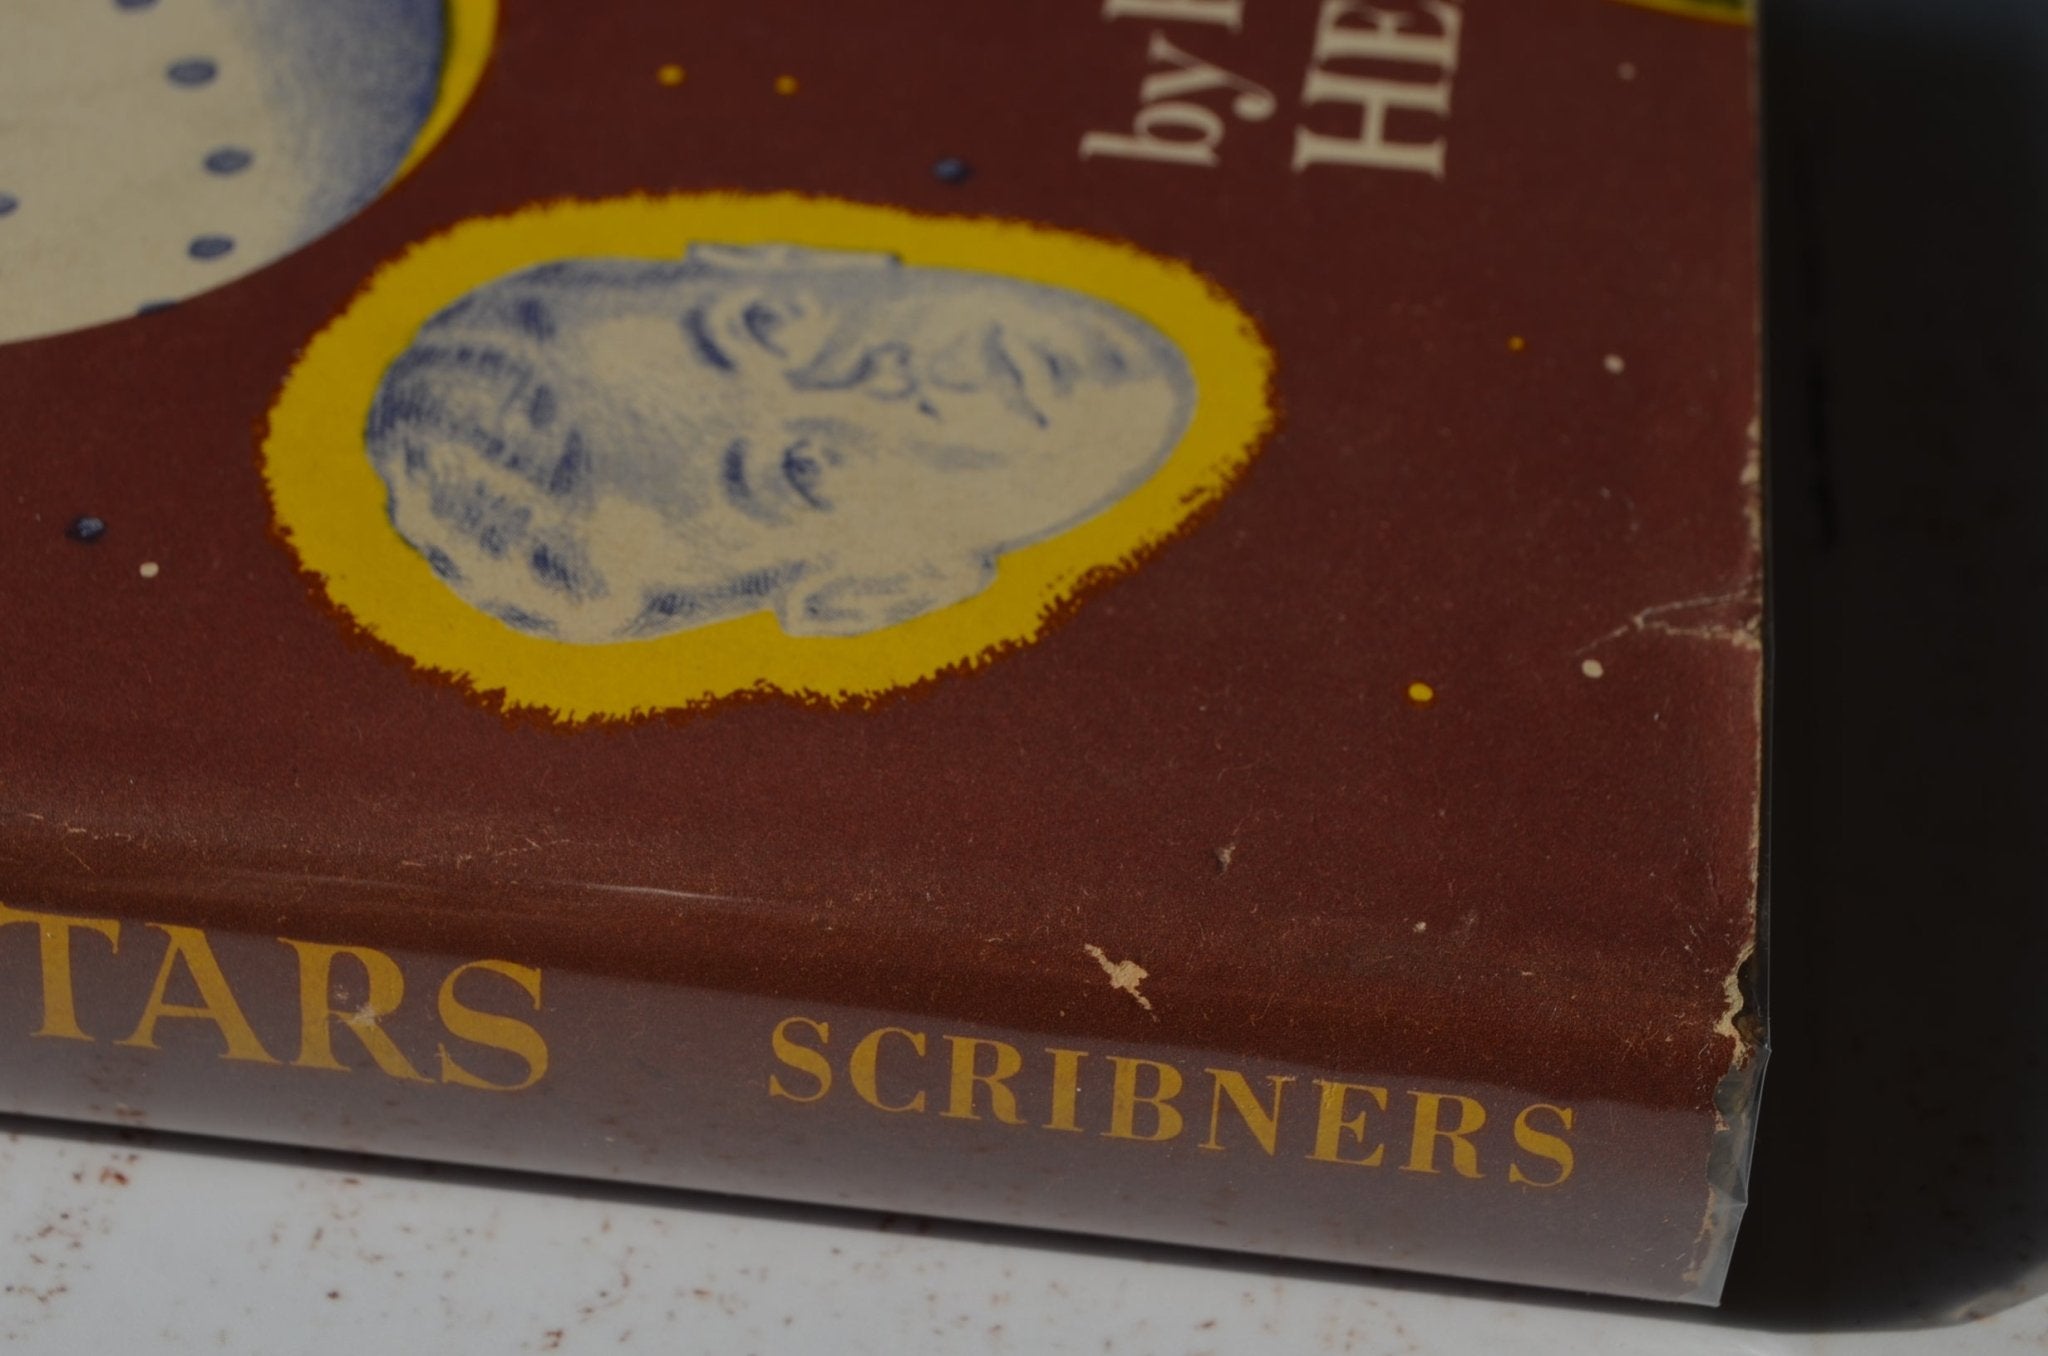 Vintage Book Club Edition – Time for the Stars by Robert Heinlein 1956 - Brookfield Books